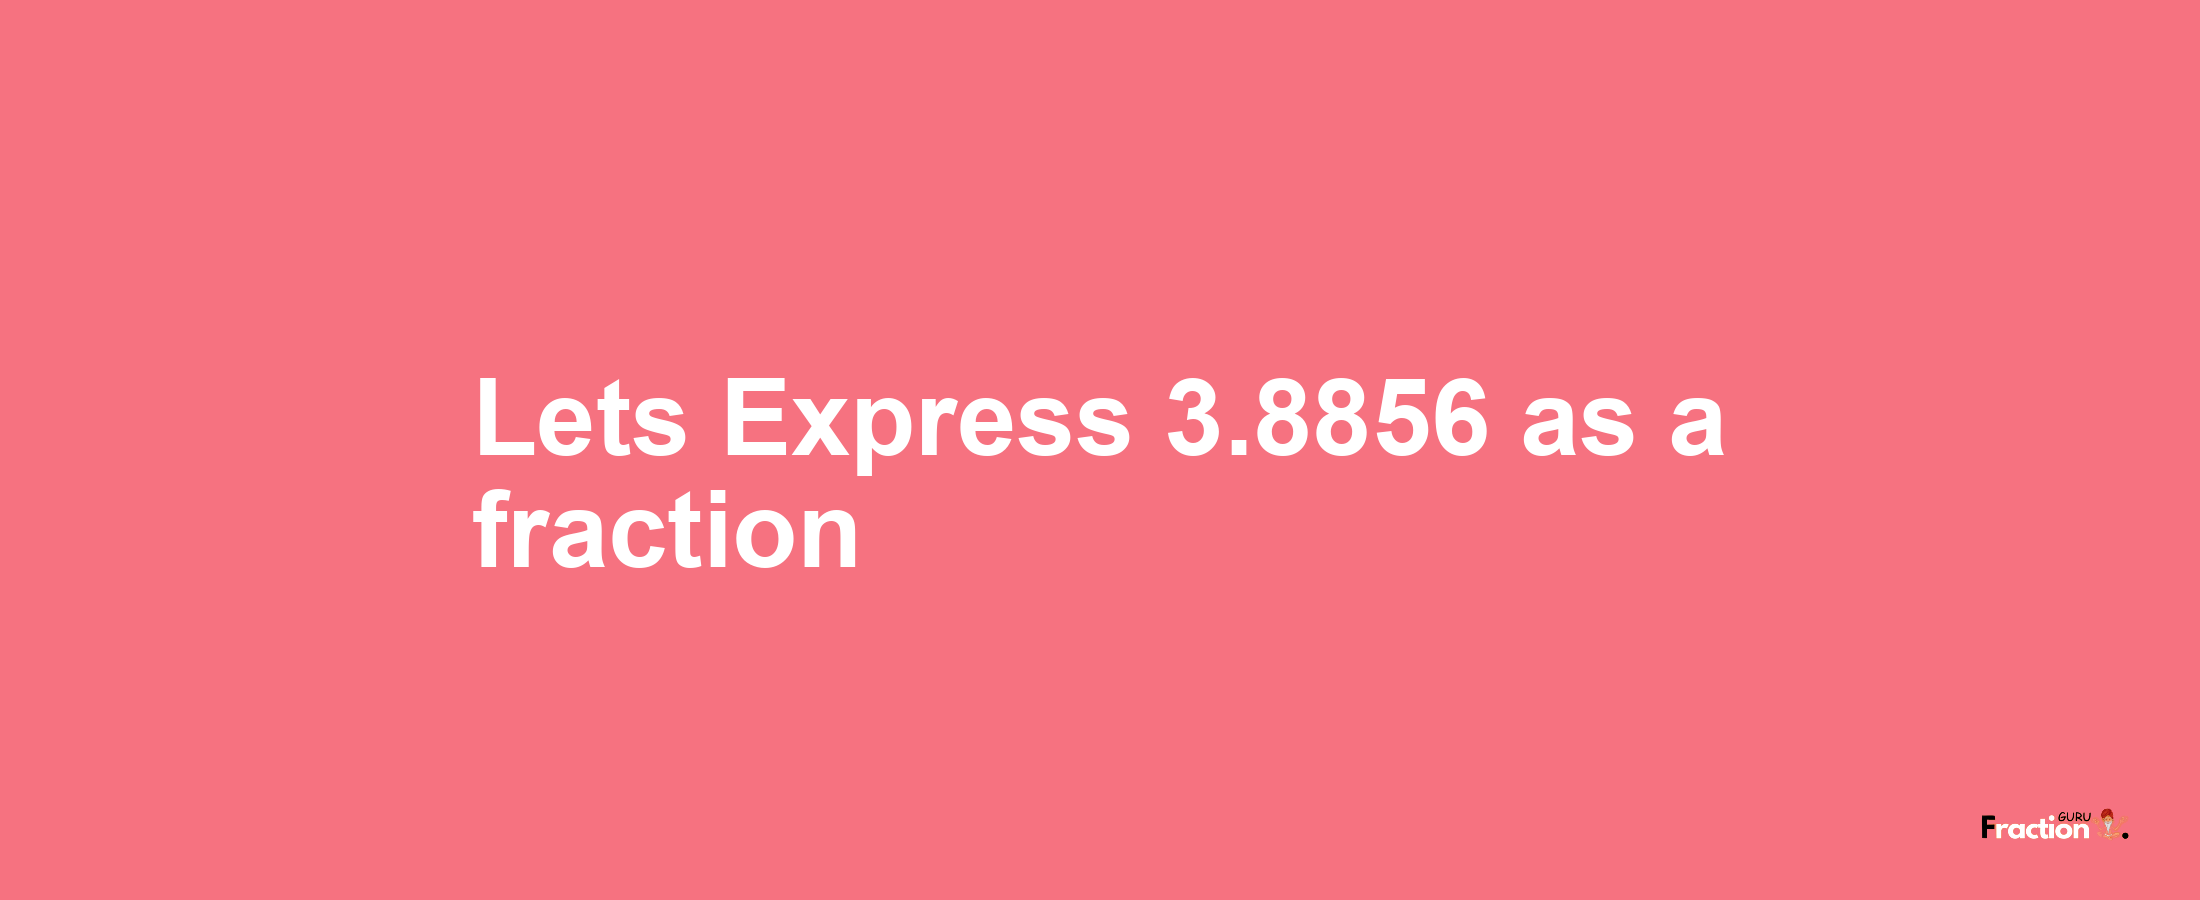 Lets Express 3.8856 as afraction